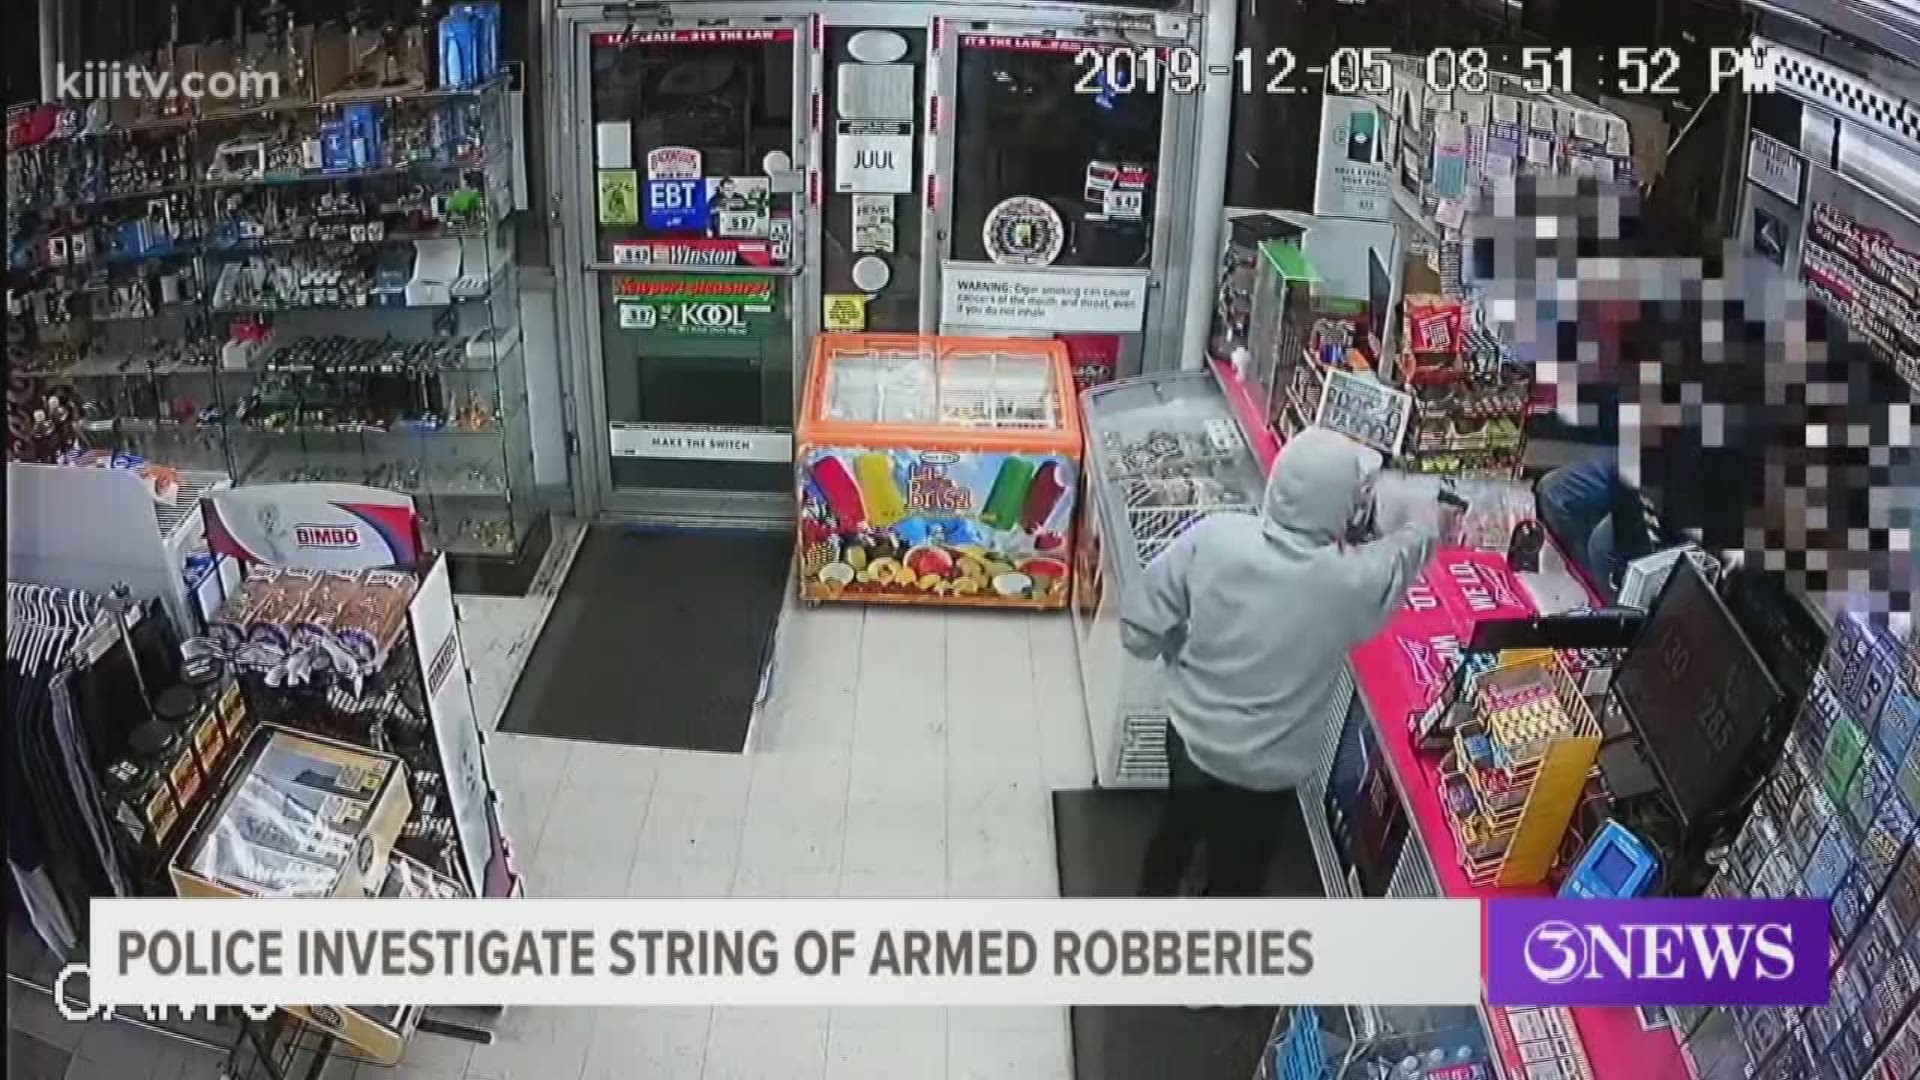 Within the last 24 hours, police arrested eight people who are said to be persons of interest in the robberies in Corpus Christi.